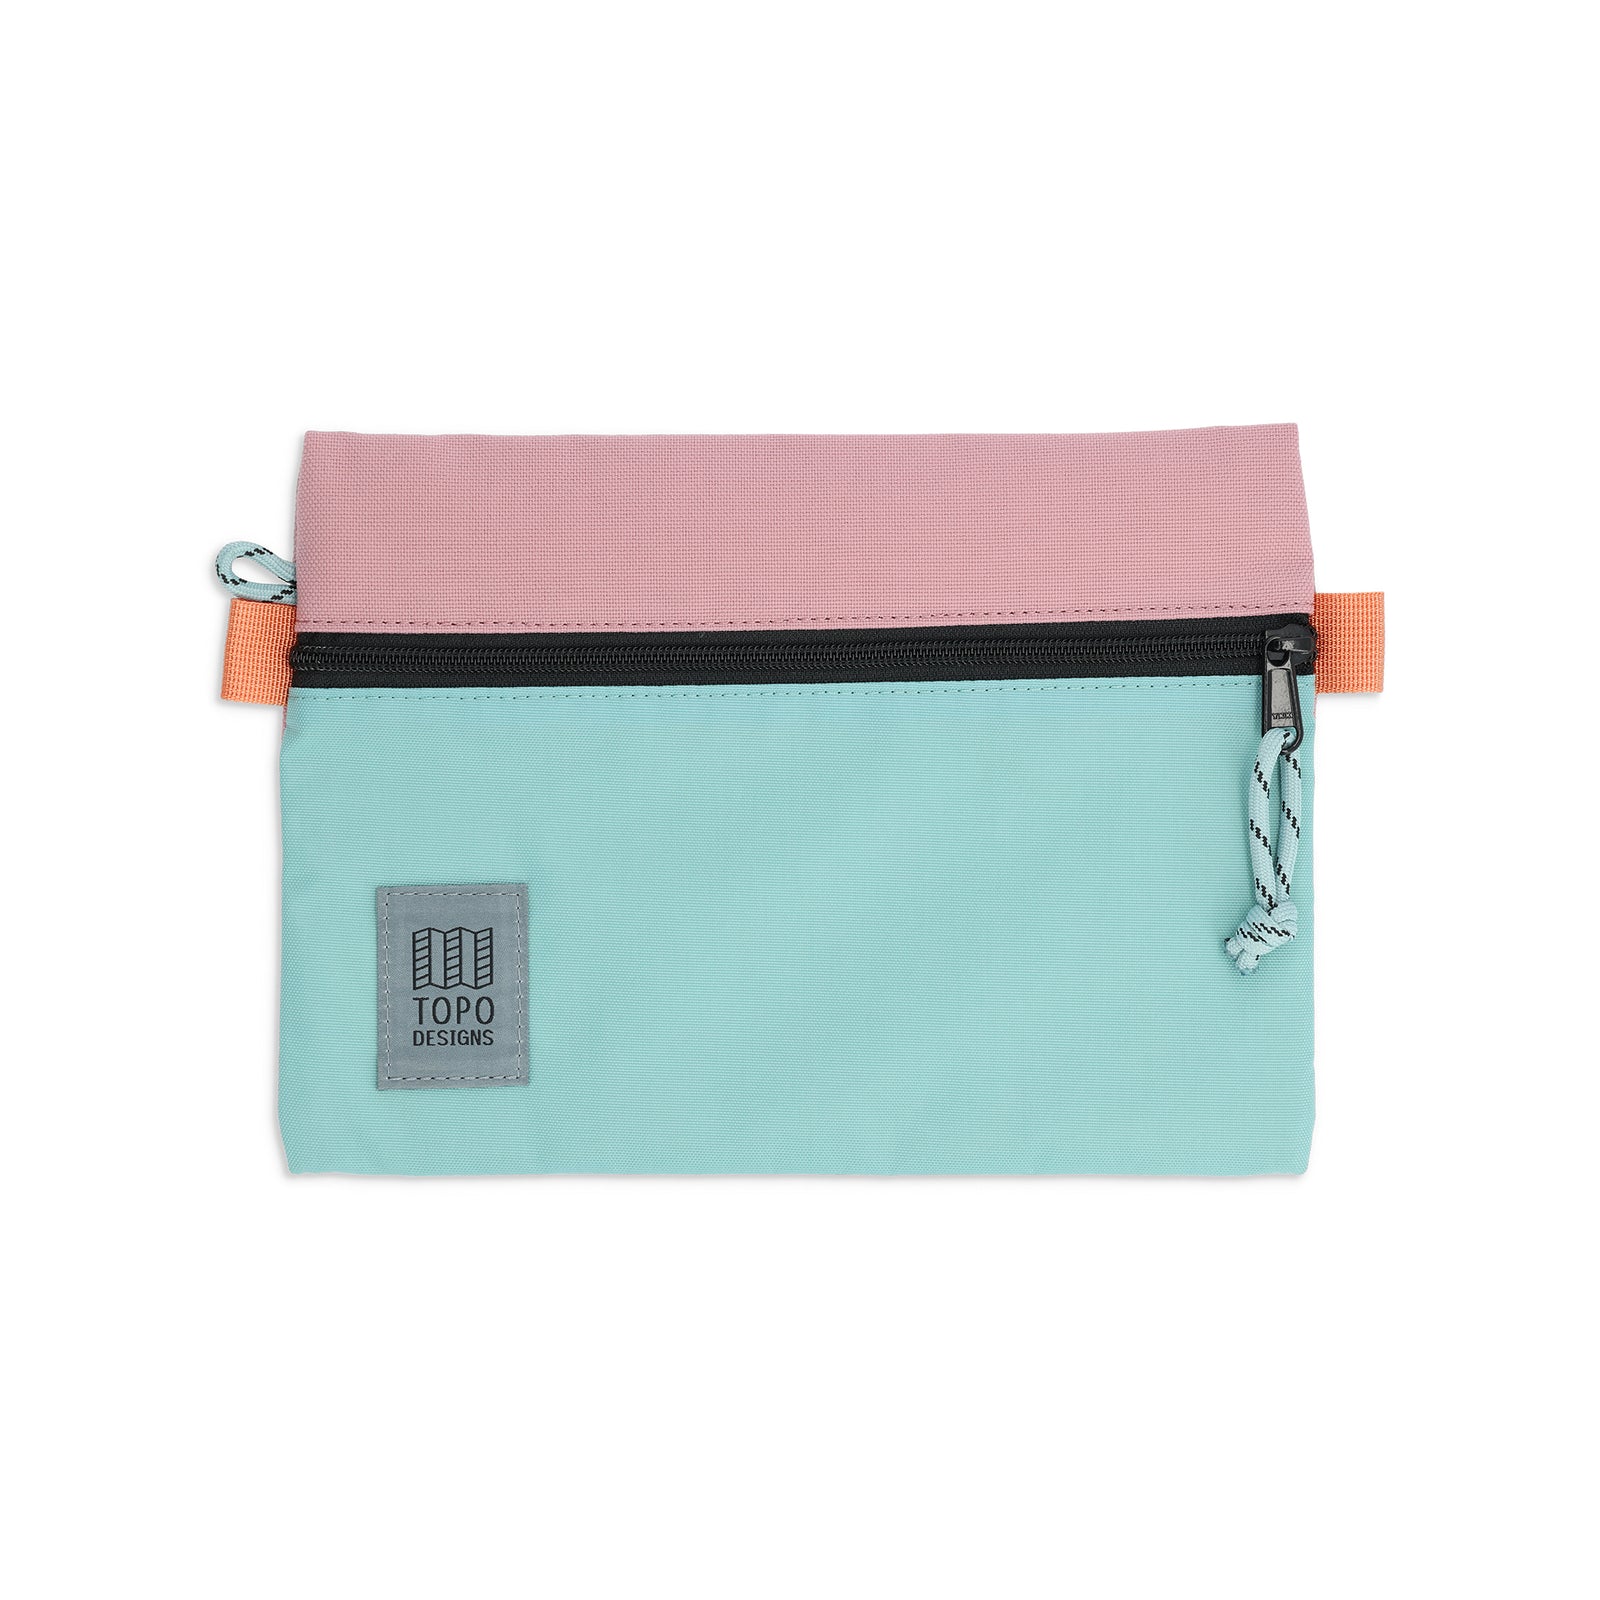 Front View of Topo Designs Accessory Bags in size "Medium" "Rose / Geode Green"